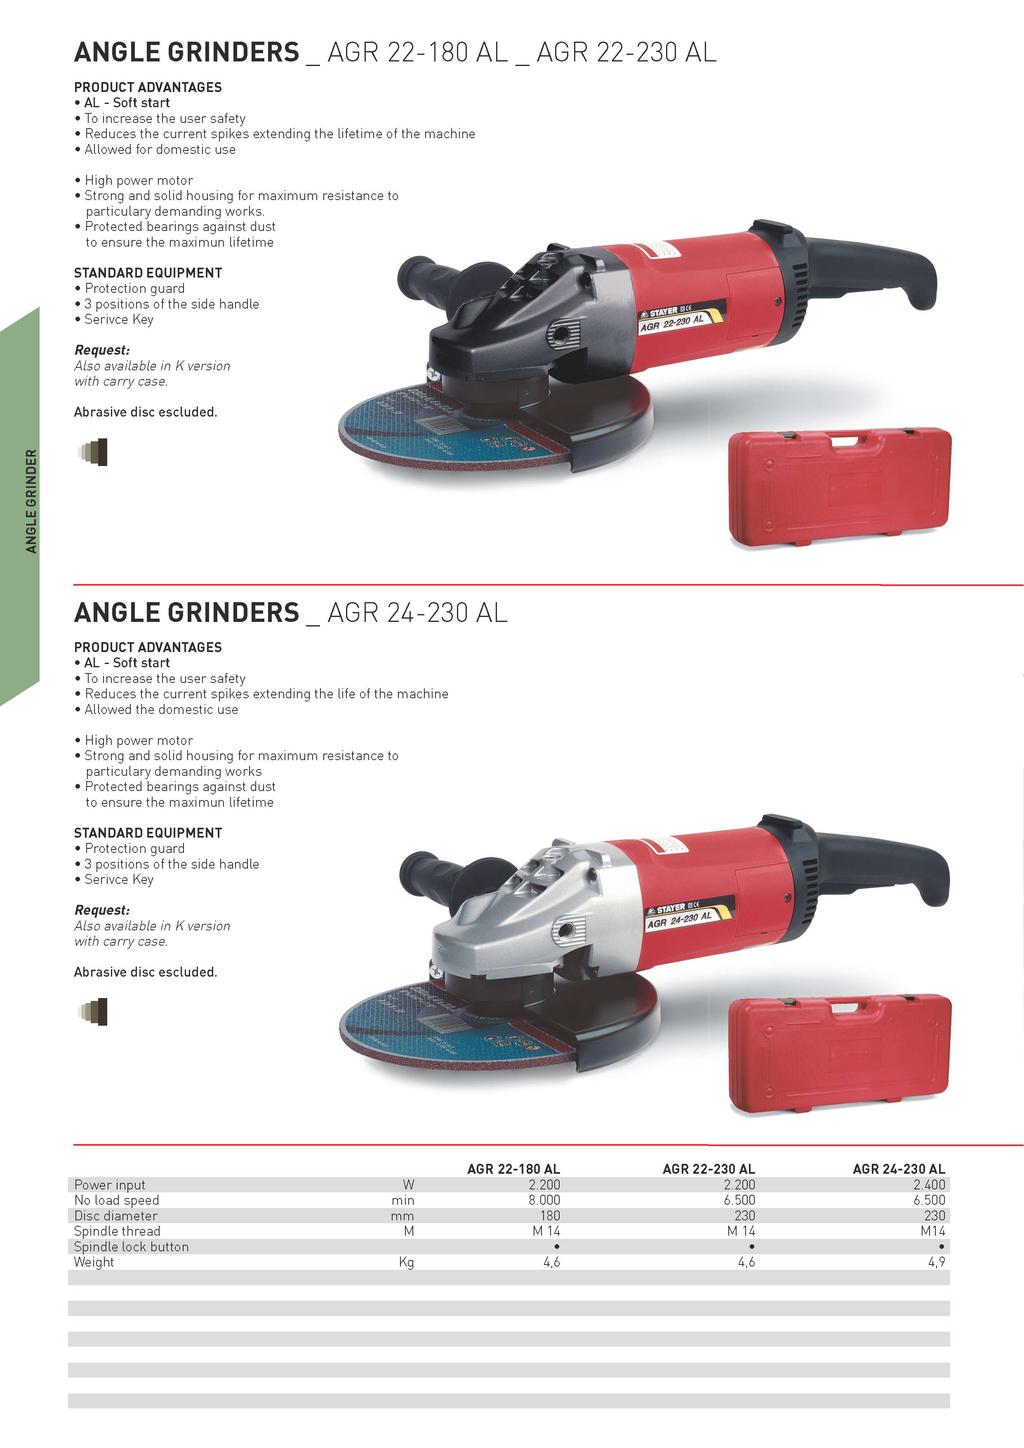 ANGLE GRINDERS _ AGR 22-180 AL _ AGR 22-230 AL To increase the user safety Reduces the current spikes extending the lifetime of the machine Allowed for domestic use High power motor Strong and solid